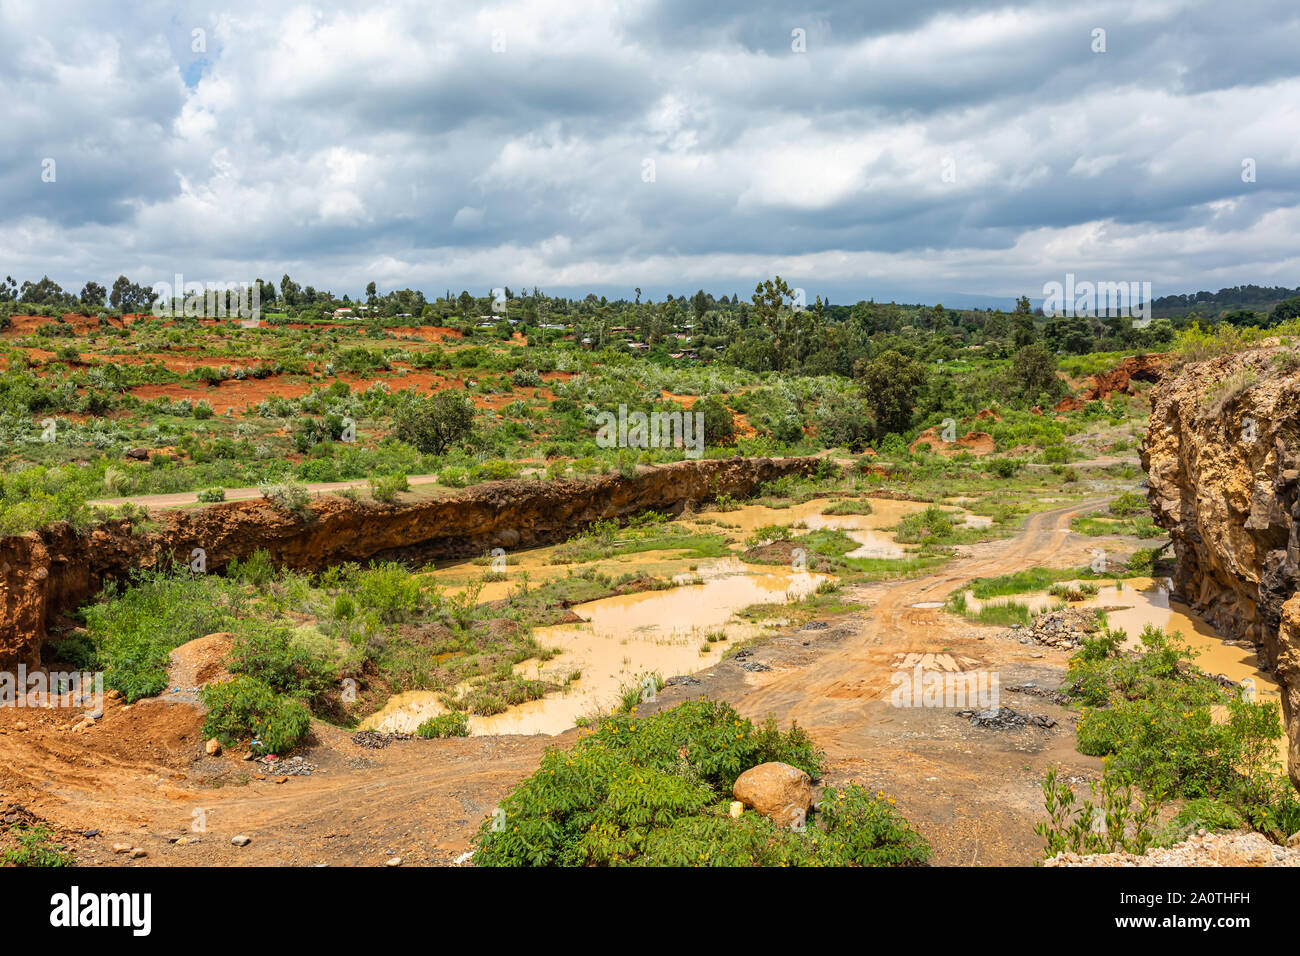 Equittel Quarry, Meru county, Kenya – June 15th, 2019: Landscape photograph of one quarry face used by locals of Kangaita village for valuable income. Stock Photo